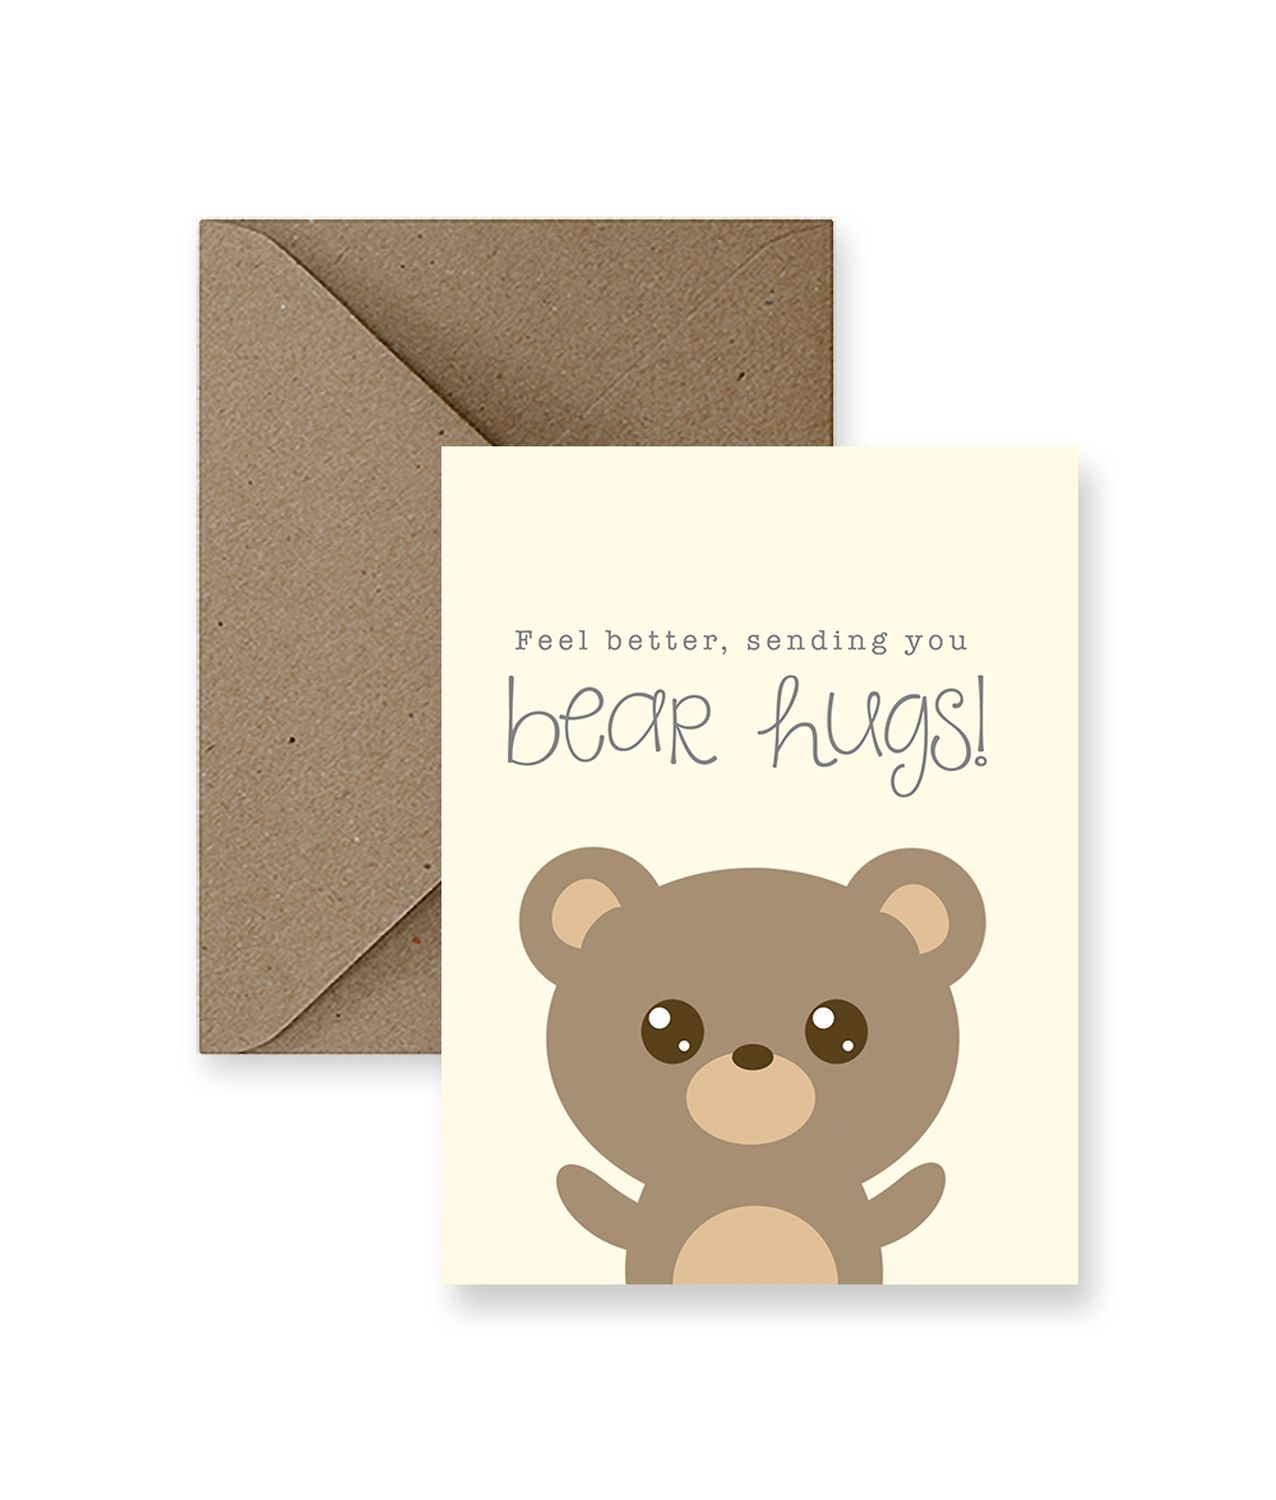 IMPAPER: Bear Hugs Get Well Card Product Image 1 of 2